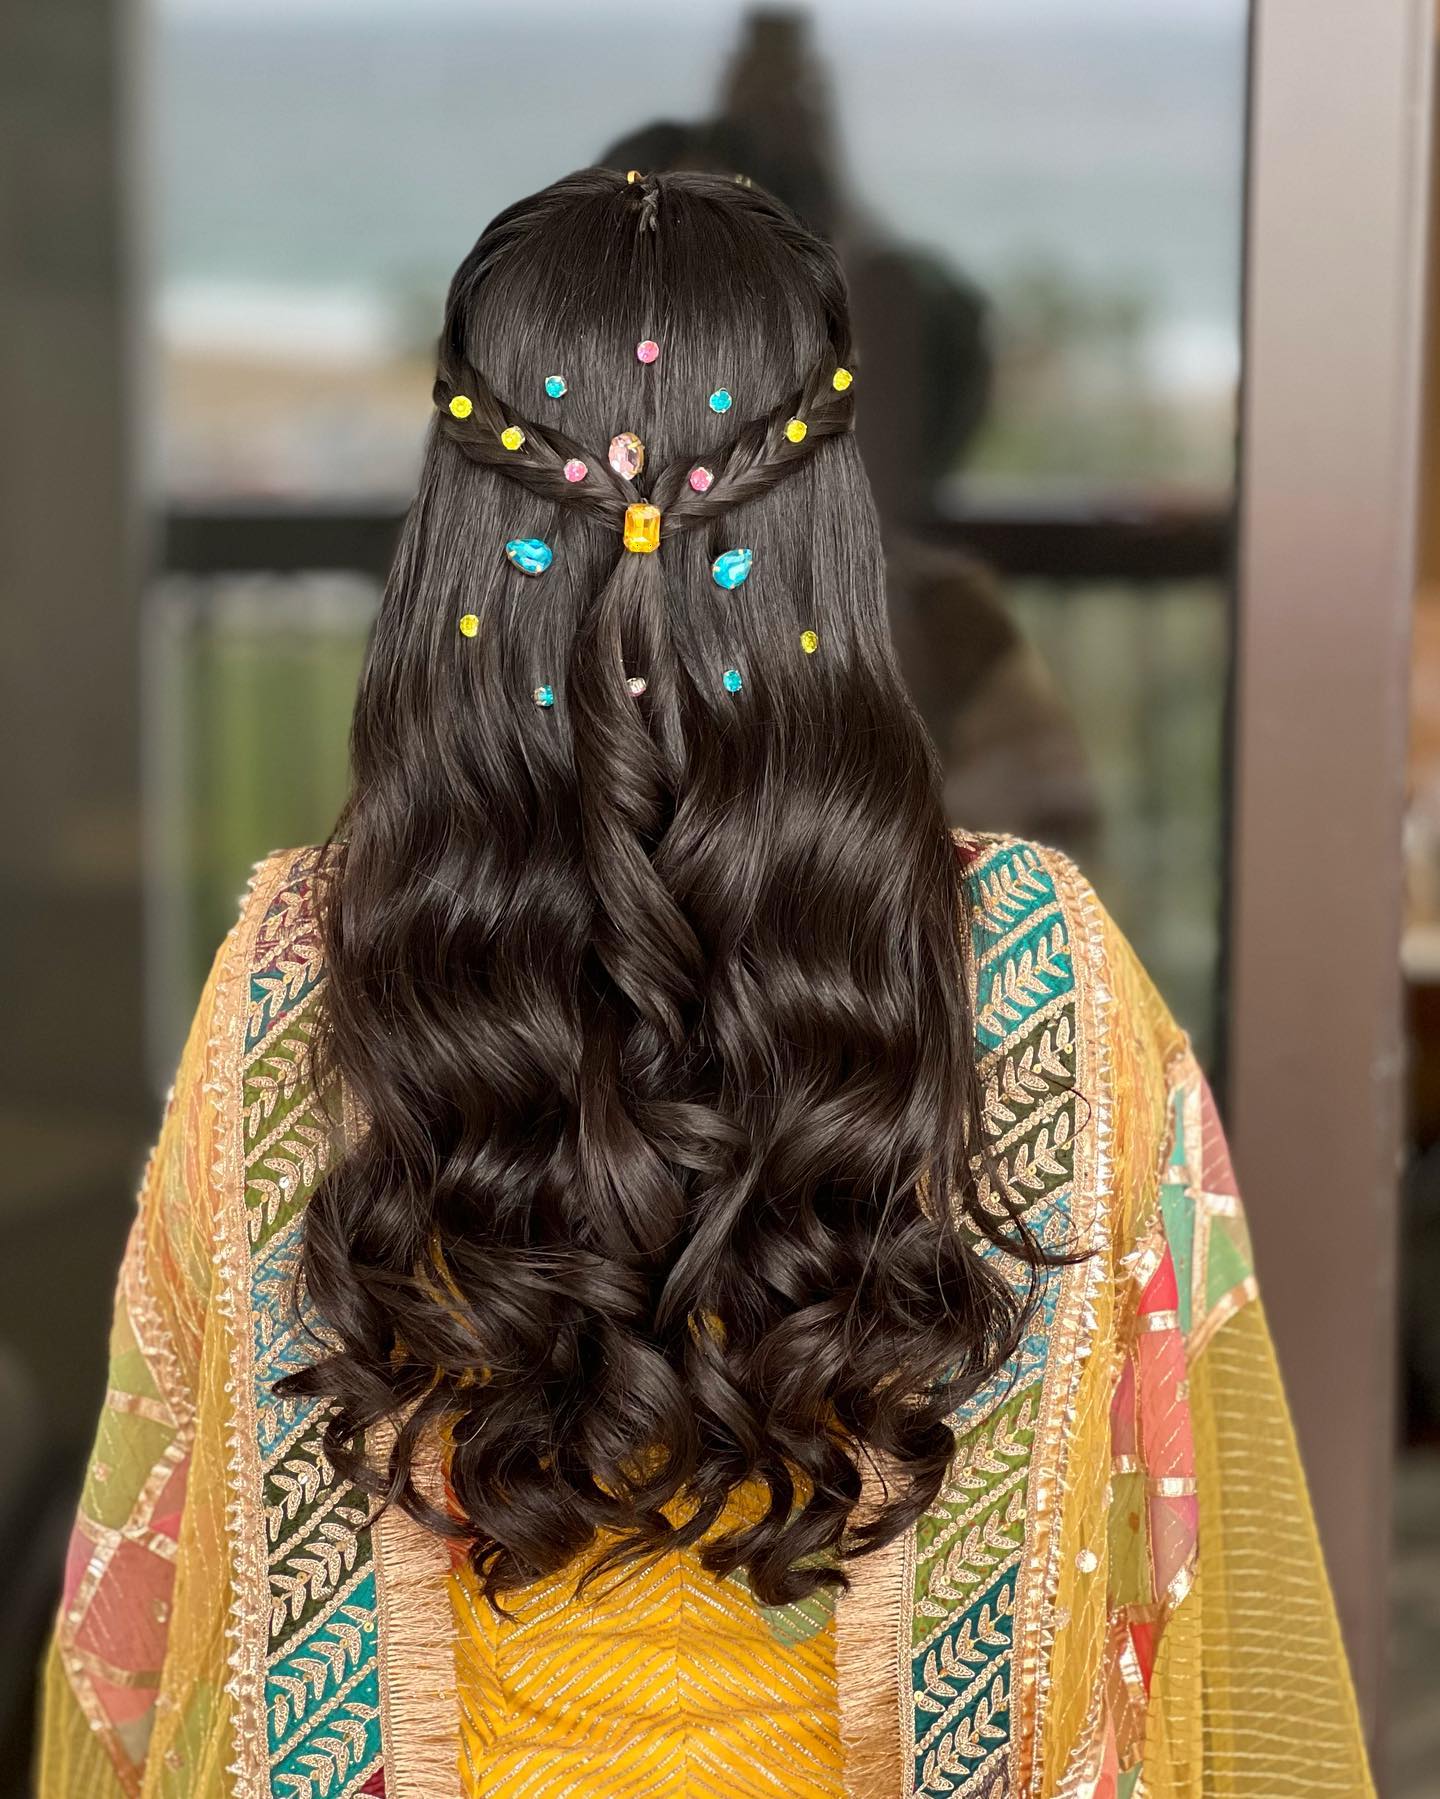 Add Bling To Your Cocktail Look With Stone-Studded Hairdo